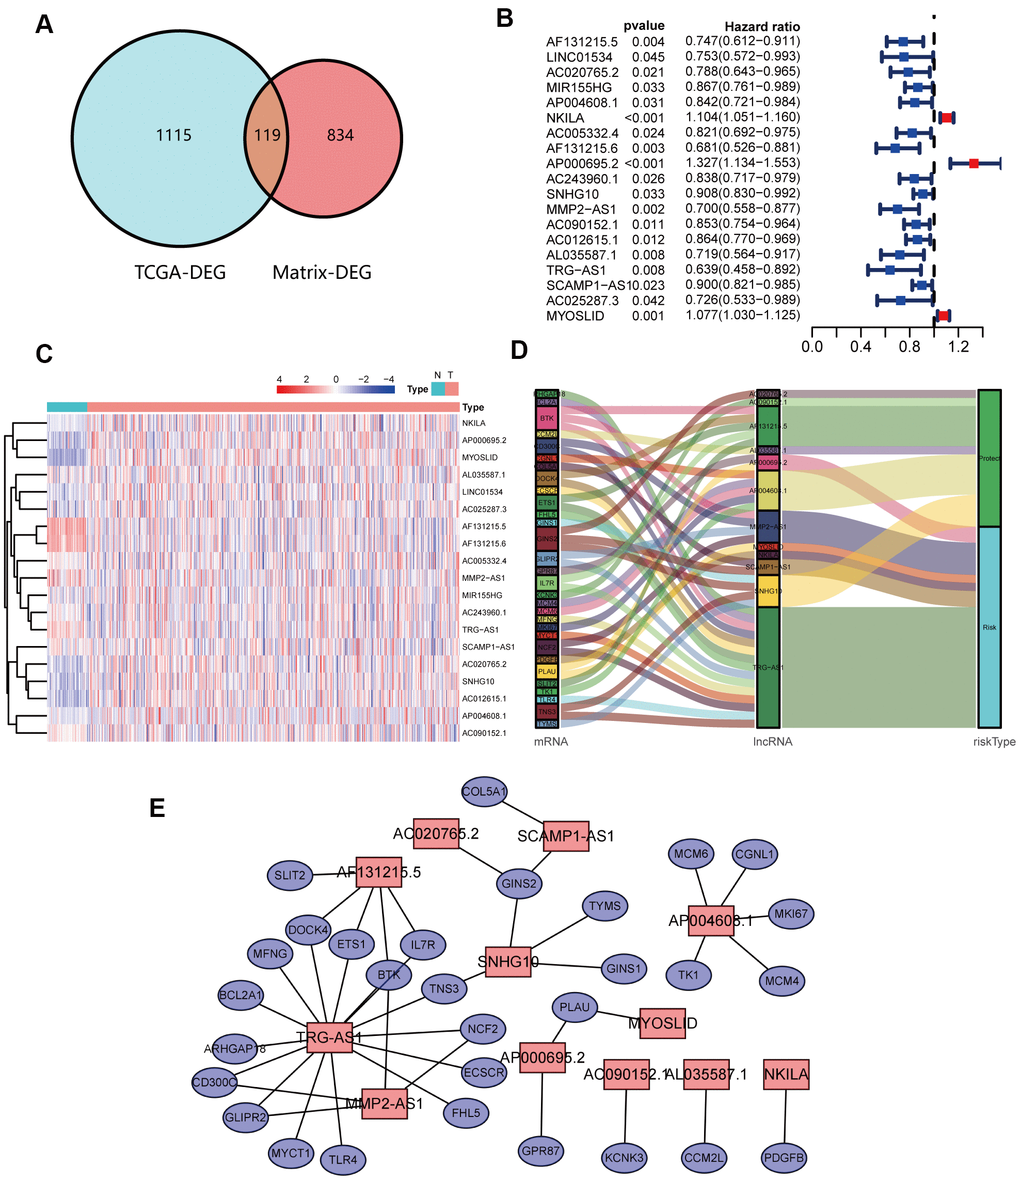 Identification and analyses of lncRNAs correlated with NETs. (A) Venn diagram identifying 119 overlapping NETs-related genes between TCGA and transcriptome RNA microarrays. (B) Forest plots demonstrating the results of the univariate Cox regression analysis between NETs-related lncRNA expression and overall survival (OS). (C) Heatmap revealing the NETs-related lncRNAs that were associated with OS by univariate Cox regression analysis in NSCLC patients and healthy people. (D) The coexpression network between 12 NETs-related lncRNAs and prognostic DEGs. Red indicates NETs-related lncRNA, and the purple indicates prognostic DEGs. (E) Sankey diagram showing the relationships among 12 NETs-related lncRNAs, prognostic DEGs and risk types.